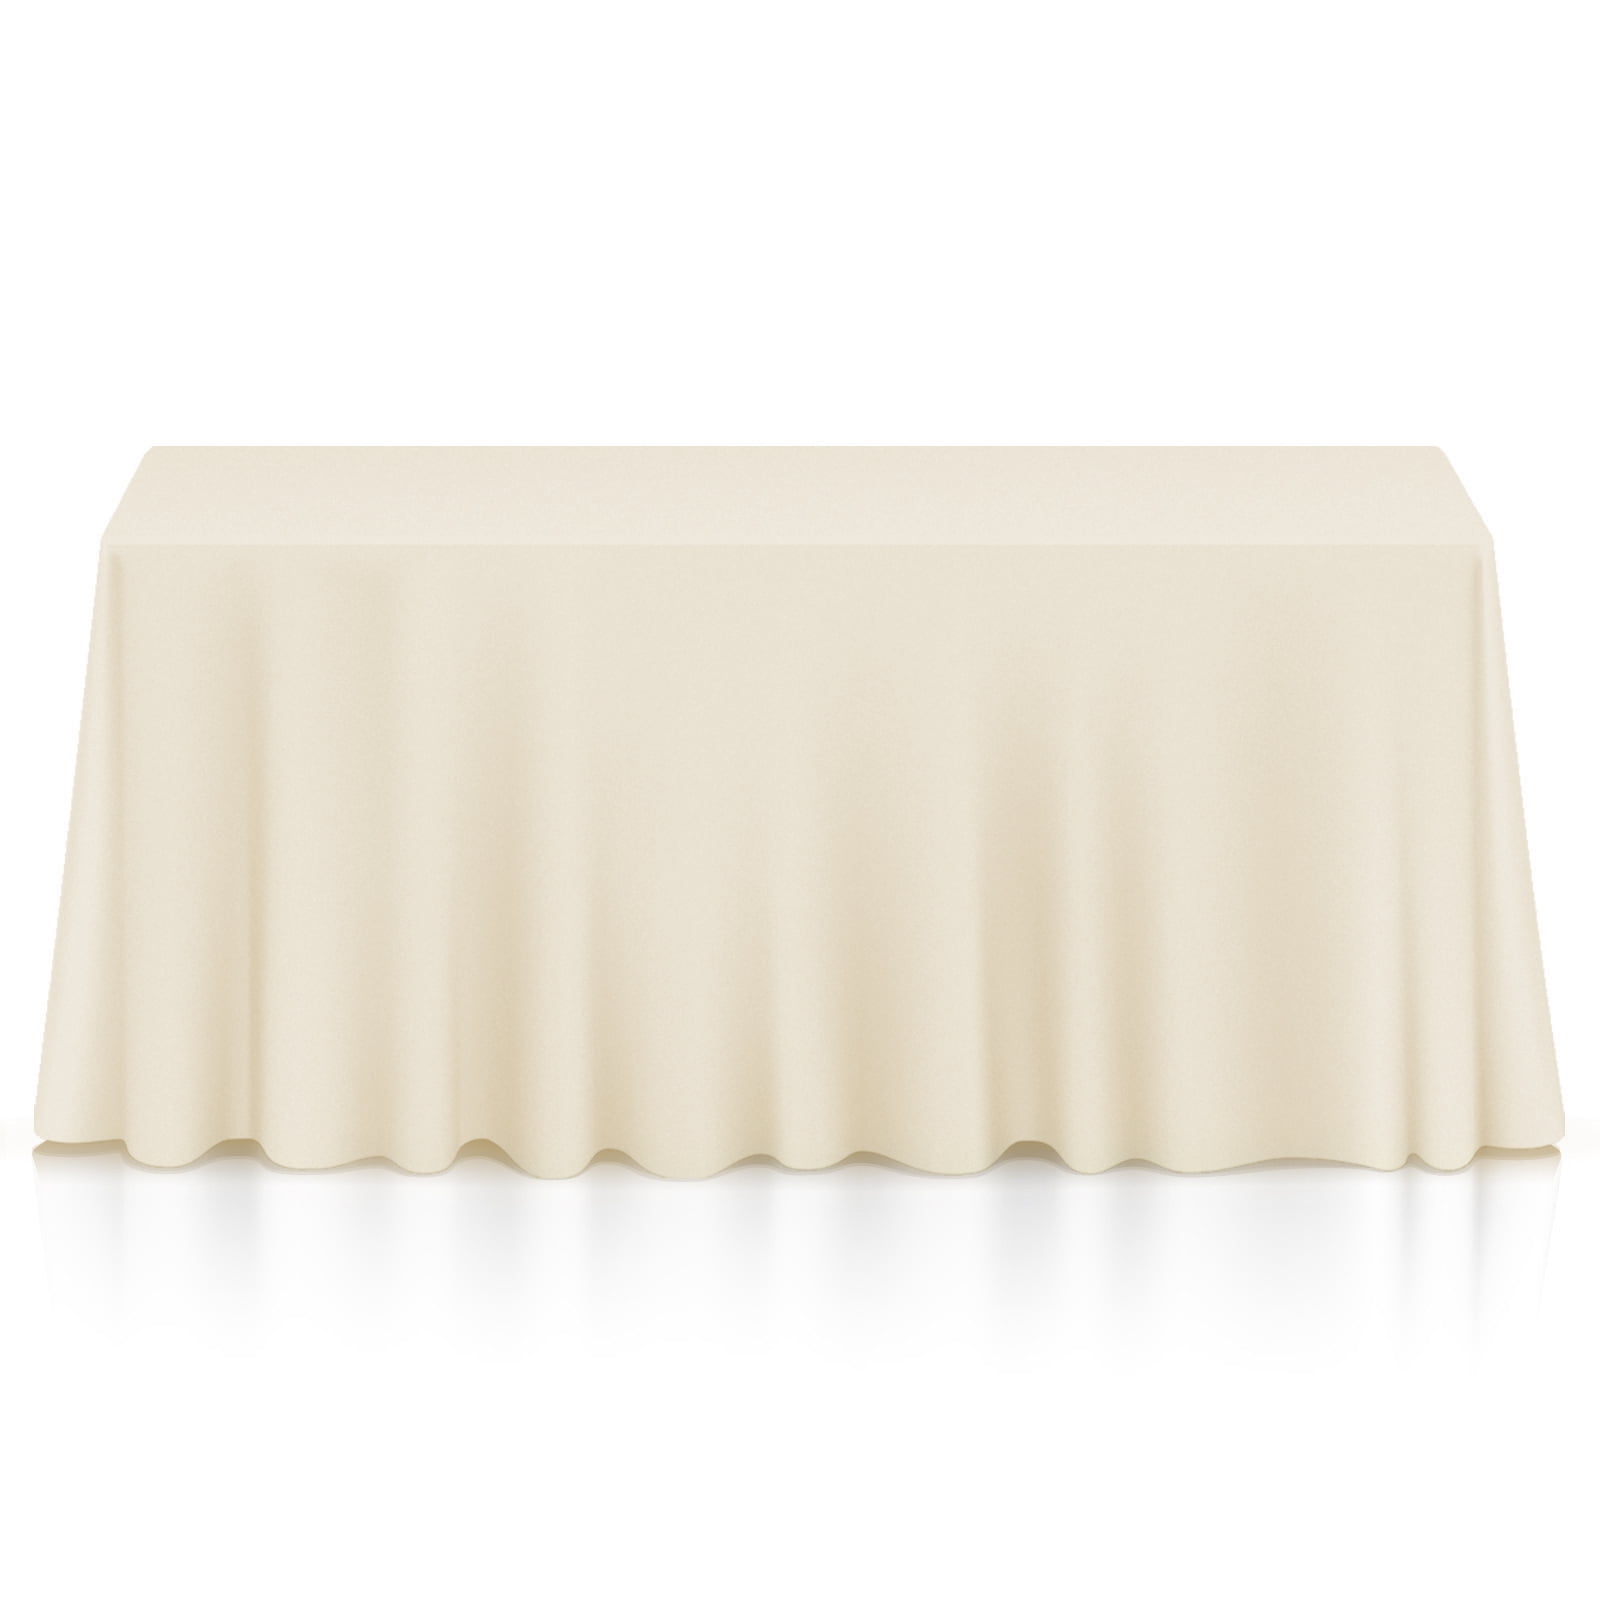 Restaurant Soft Washable Oblong Table Cloths for Wedding Dinner Parties Buffet Table and More VEEYOO Rectangle Tablecloth Polyester Table Cloth for 6 Foot Table